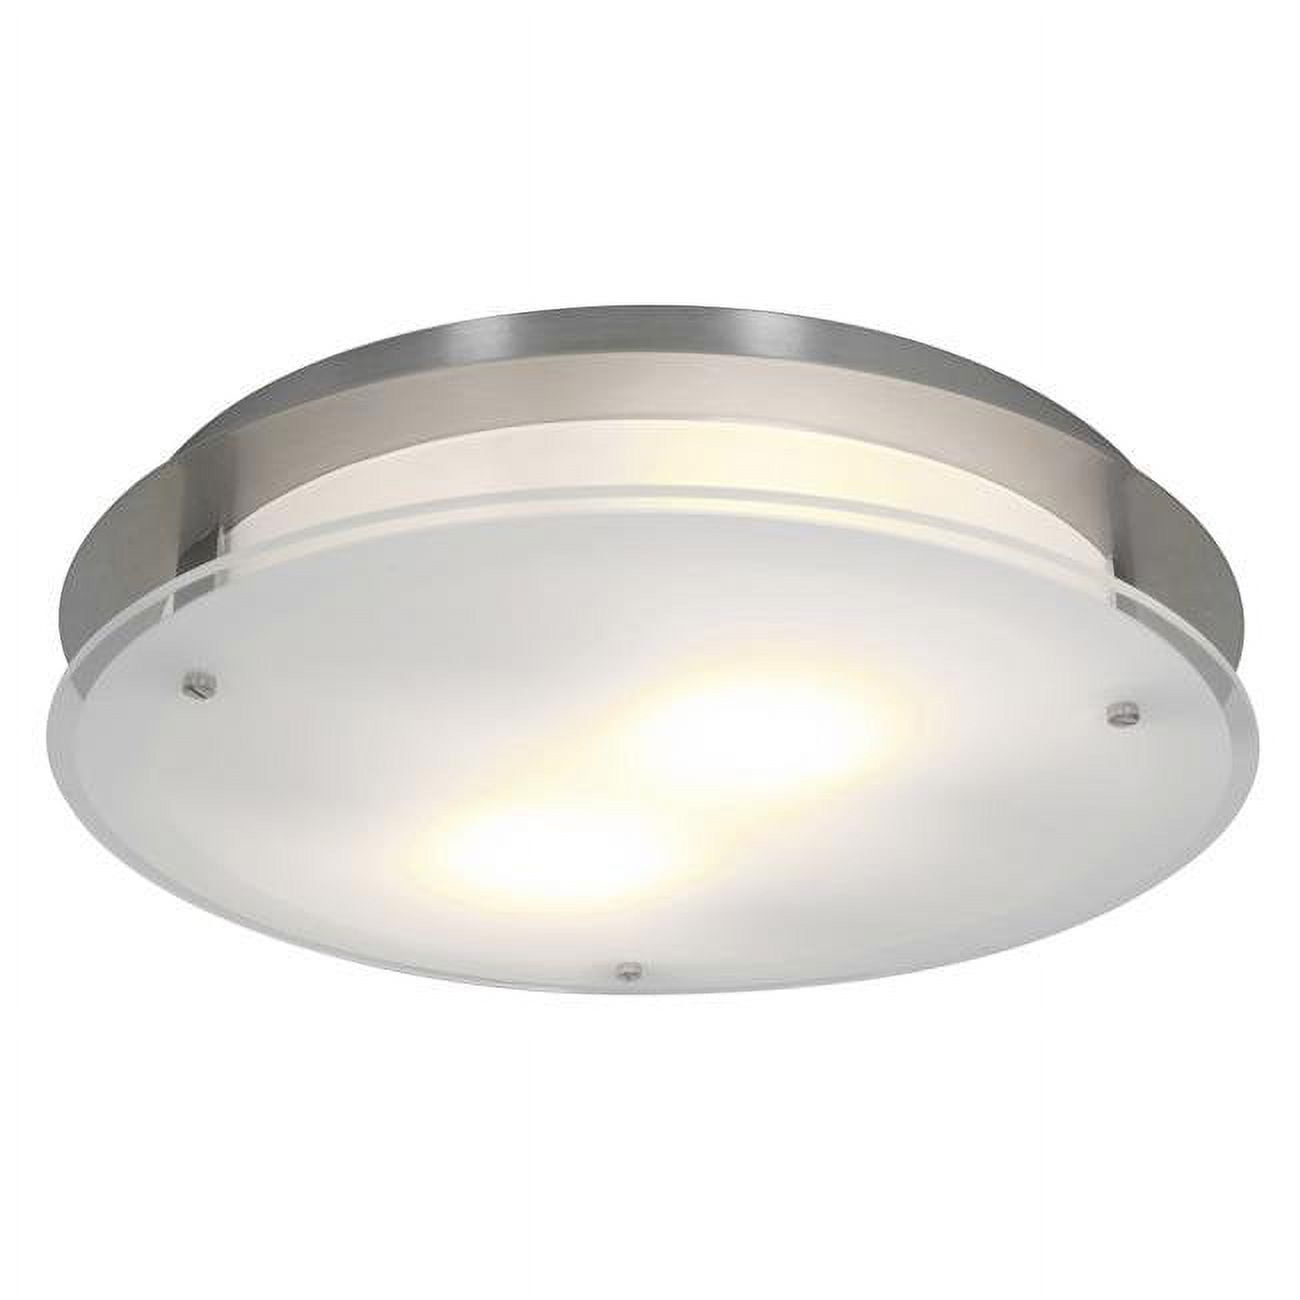 Picture of Access Lighting 50038LEDD-BS-FST VisionRound LED Brushed Steel Flush Mount Ceiling Light, Frosted